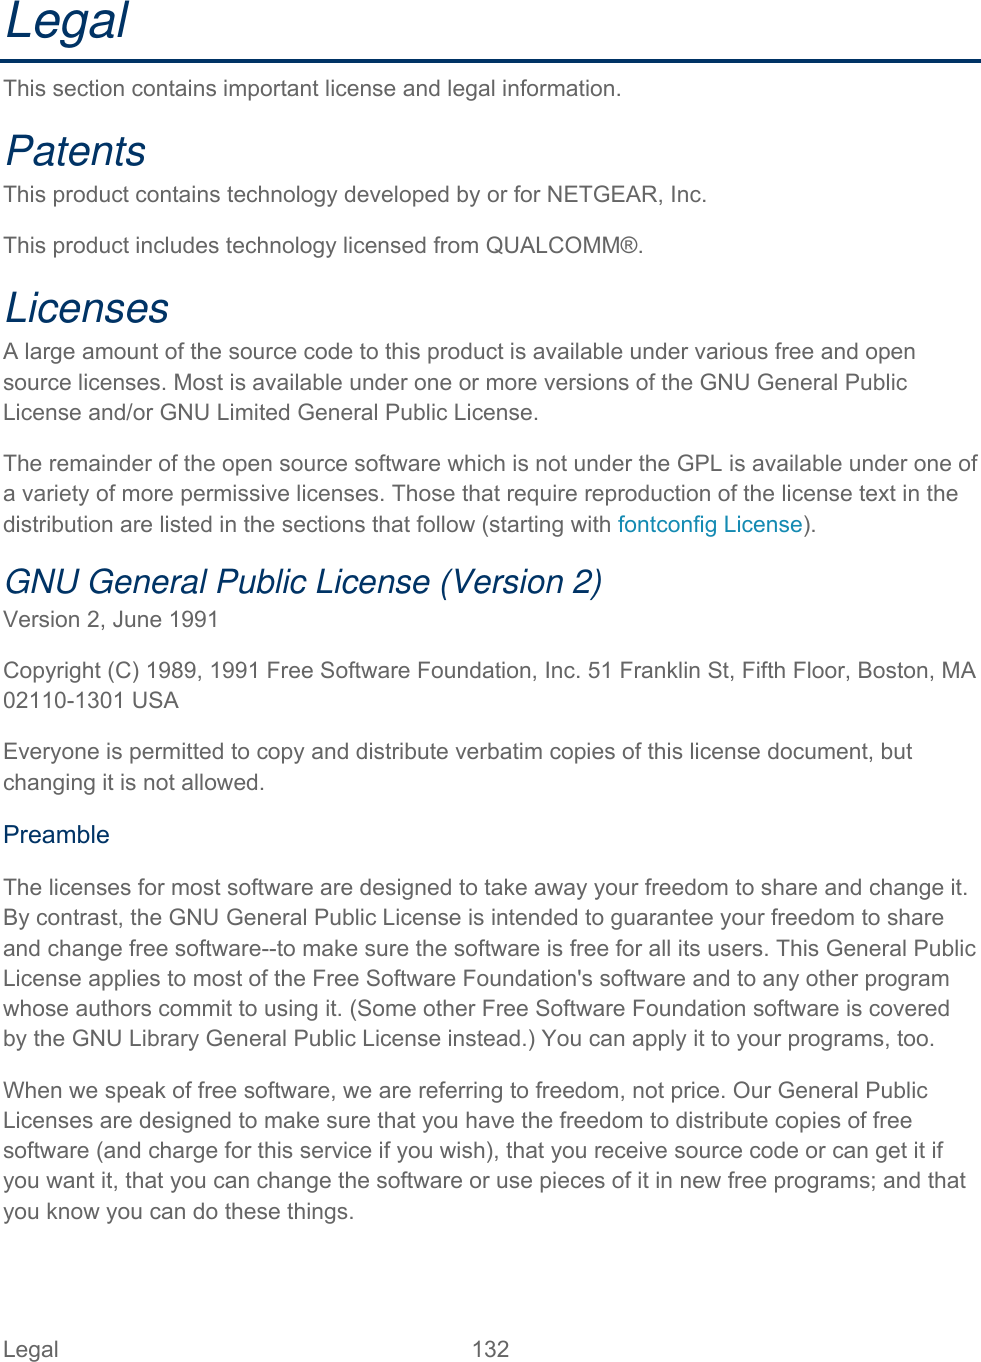 Legal 132   Legal This section contains important license and legal information. Patents  This product contains technology developed by or for NETGEAR, Inc. This product includes technology licensed from QUALCOMM®. Licenses  A large amount of the source code to this product is available under various free and open source licenses. Most is available under one or more versions of the GNU General Public License and/or GNU Limited General Public License. The remainder of the open source software which is not under the GPL is available under one of a variety of more permissive licenses. Those that require reproduction of the license text in the distribution are listed in the sections that follow (starting with fontconfig License). GNU General Public License (Version 2)  Version 2, June 1991 Copyright (C) 1989, 1991 Free Software Foundation, Inc. 51 Franklin St, Fifth Floor, Boston, MA 02110-1301 USA Everyone is permitted to copy and distribute verbatim copies of this license document, but changing it is not allowed.  Preamble The licenses for most software are designed to take away your freedom to share and change it. By contrast, the GNU General Public License is intended to guarantee your freedom to share and change free software--to make sure the software is free for all its users. This General Public License applies to most of the Free Software Foundation&apos;s software and to any other program whose authors commit to using it. (Some other Free Software Foundation software is covered by the GNU Library General Public License instead.) You can apply it to your programs, too.  When we speak of free software, we are referring to freedom, not price. Our General Public Licenses are designed to make sure that you have the freedom to distribute copies of free software (and charge for this service if you wish), that you receive source code or can get it if you want it, that you can change the software or use pieces of it in new free programs; and that you know you can do these things. 